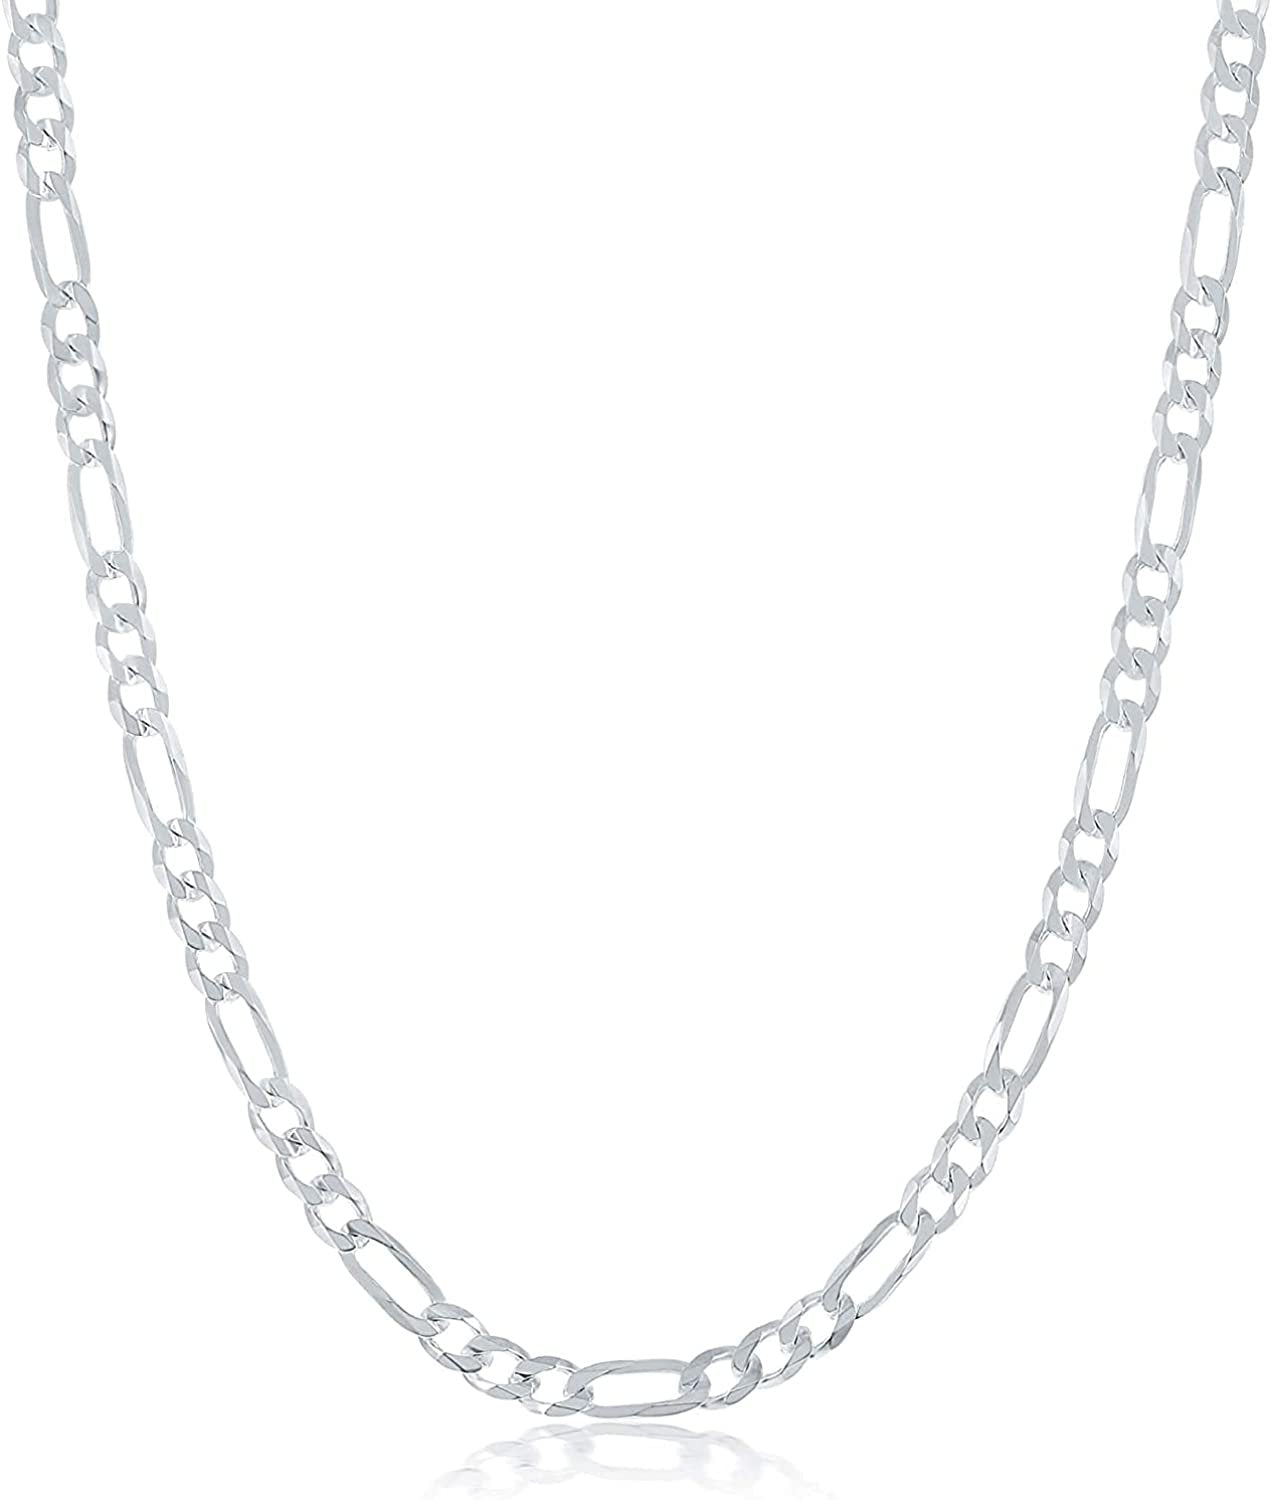 Floreo .925 Sterling Silver Solid Figaro Chain Necklace or Bracelet, Made in Italy